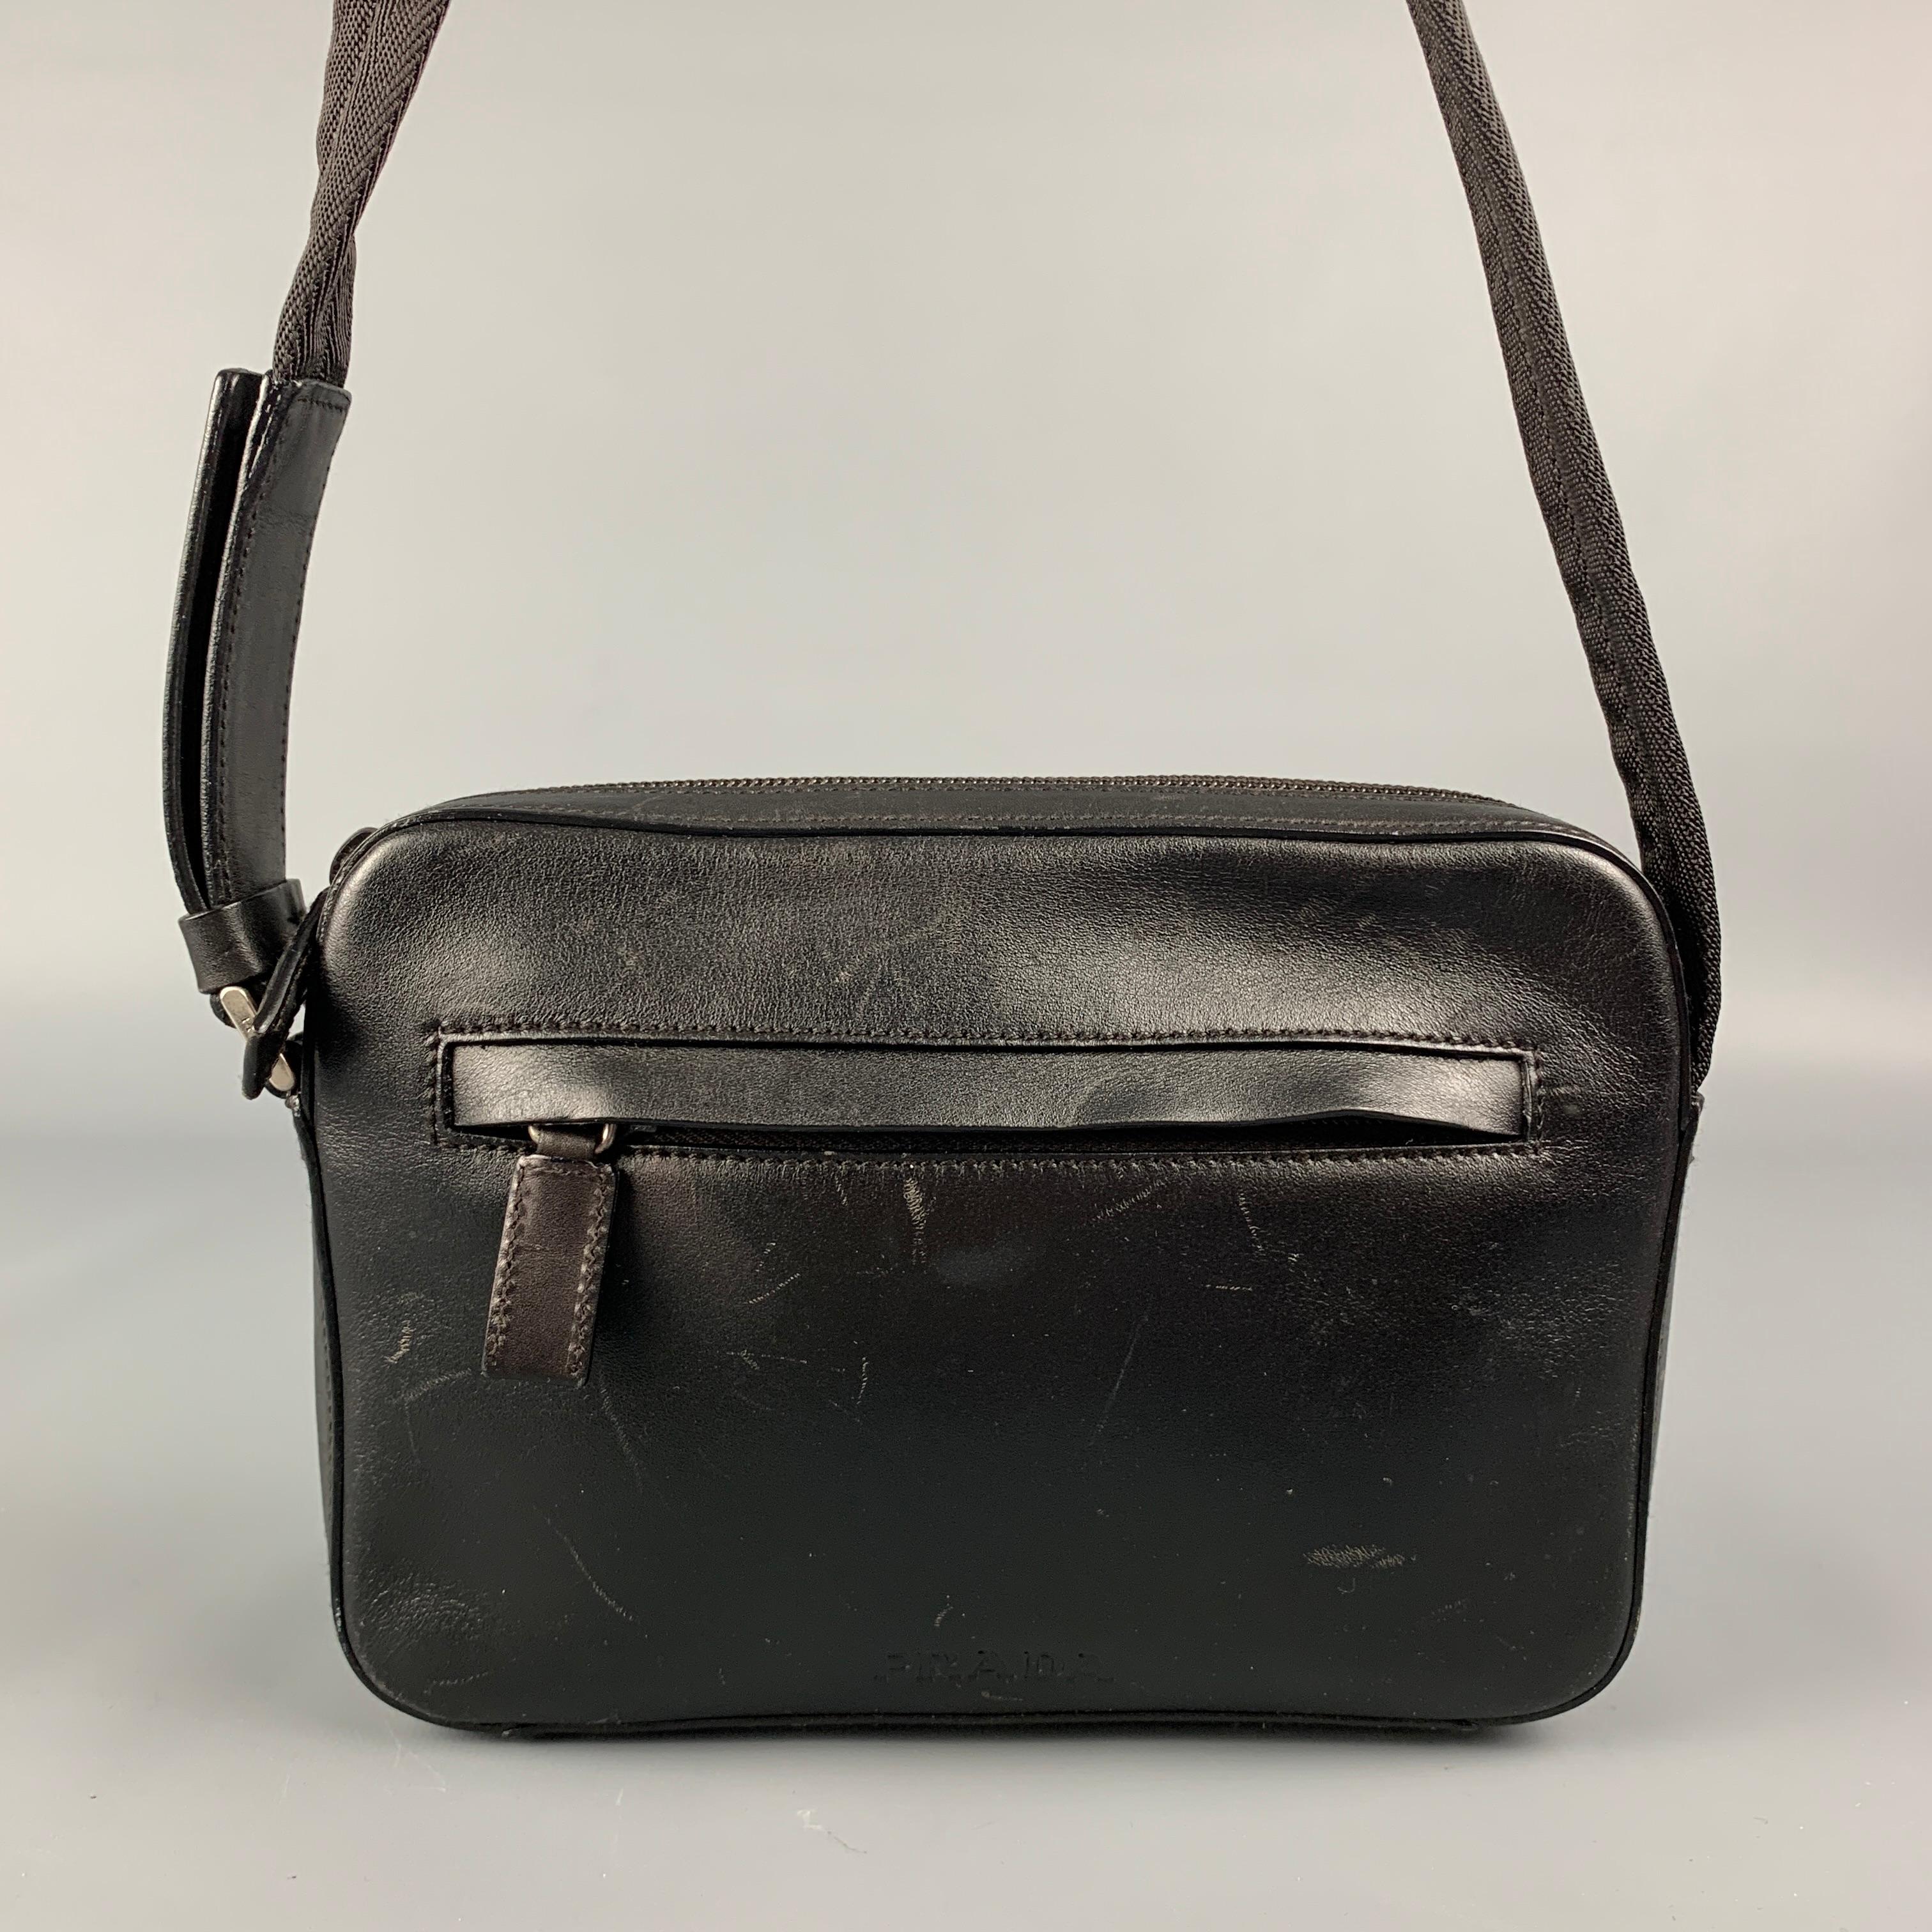 Vintage PRADA handbag comes in a black leather featuring a cross body strap, front zipper pocket, inner compartment, and a top zipper closure. Made in Italy. 

Good Pre-Owned Condition. Moderate marks throughout.
Marked: 53

Measurements:

Length: